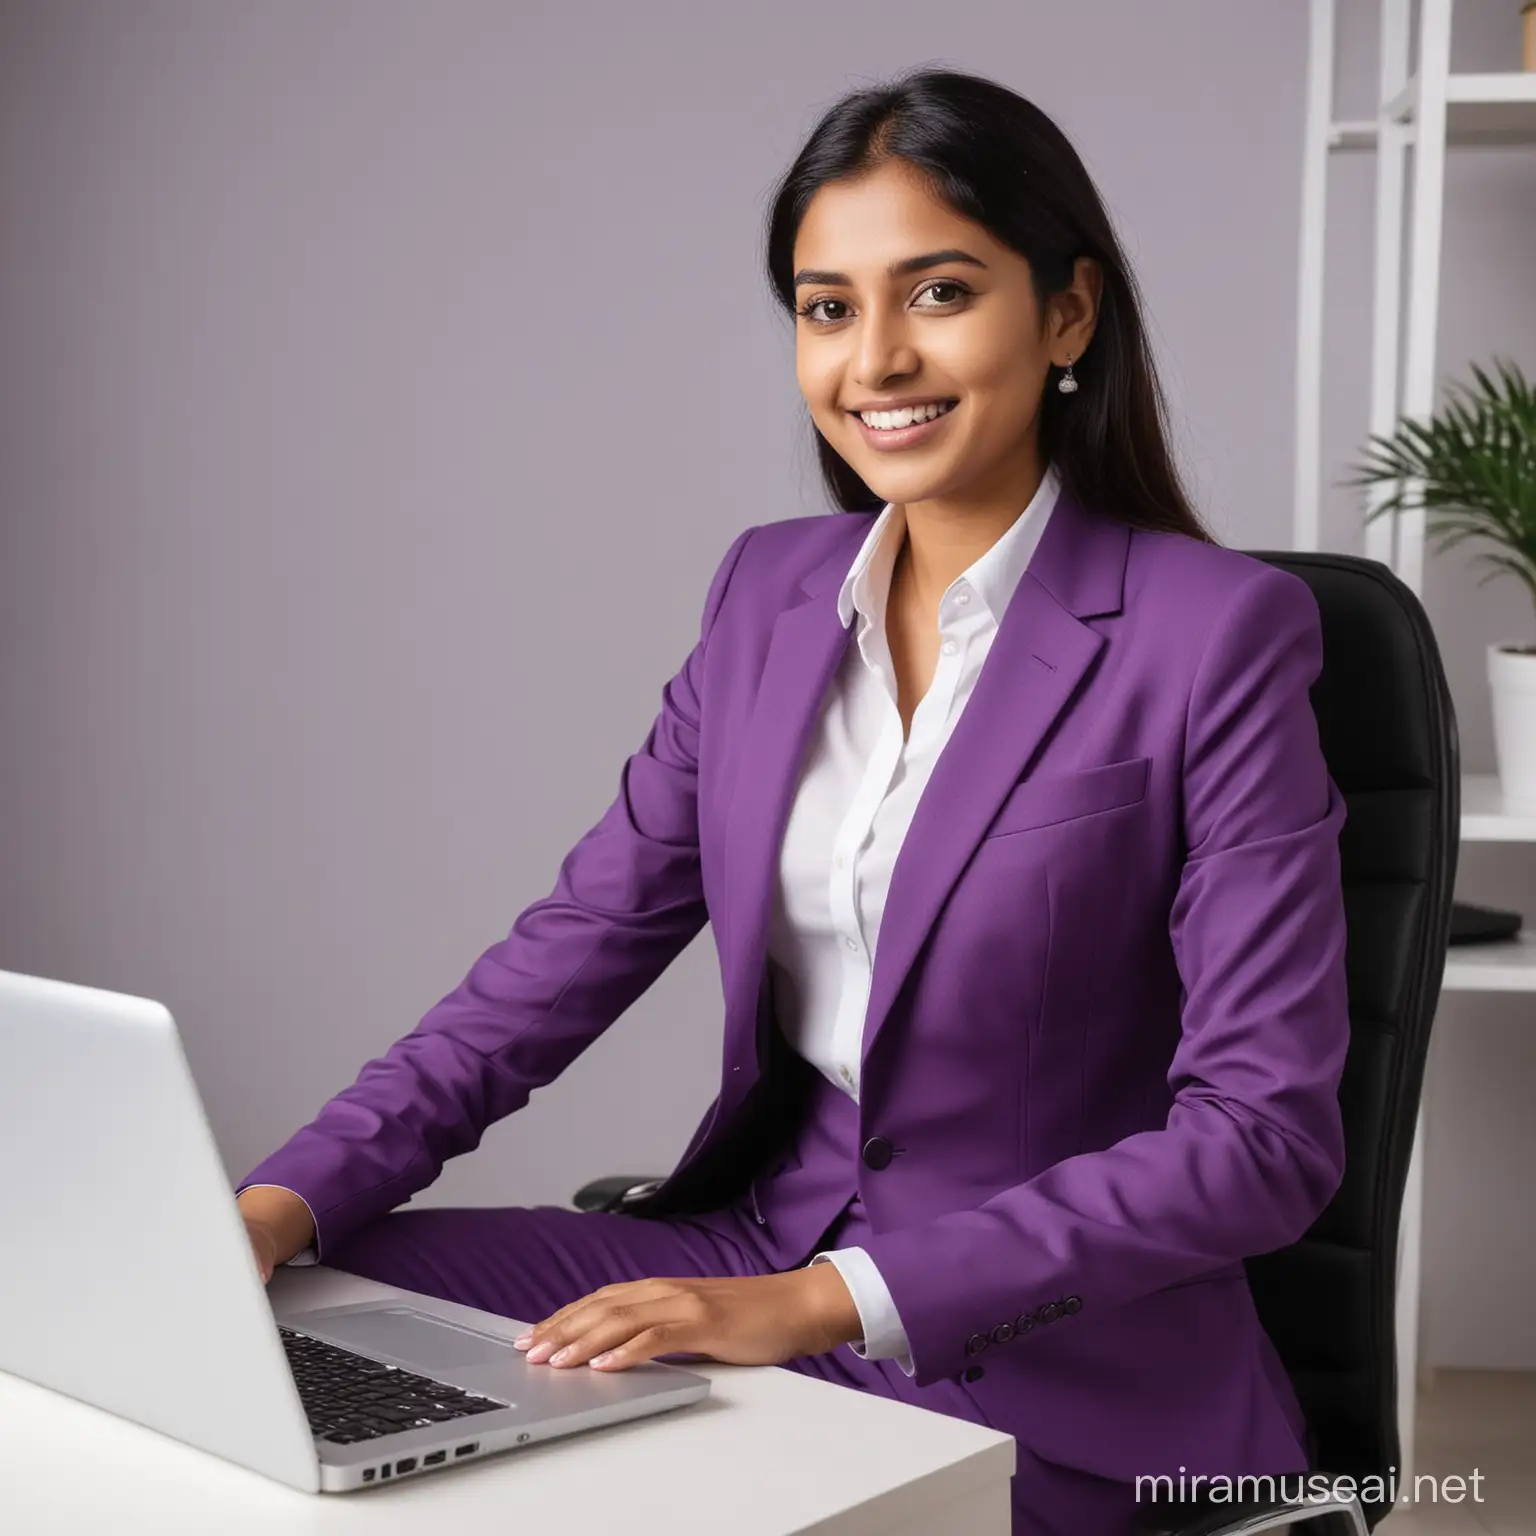 Indian Female Purchasing Manager Working Happily in Purple Suit